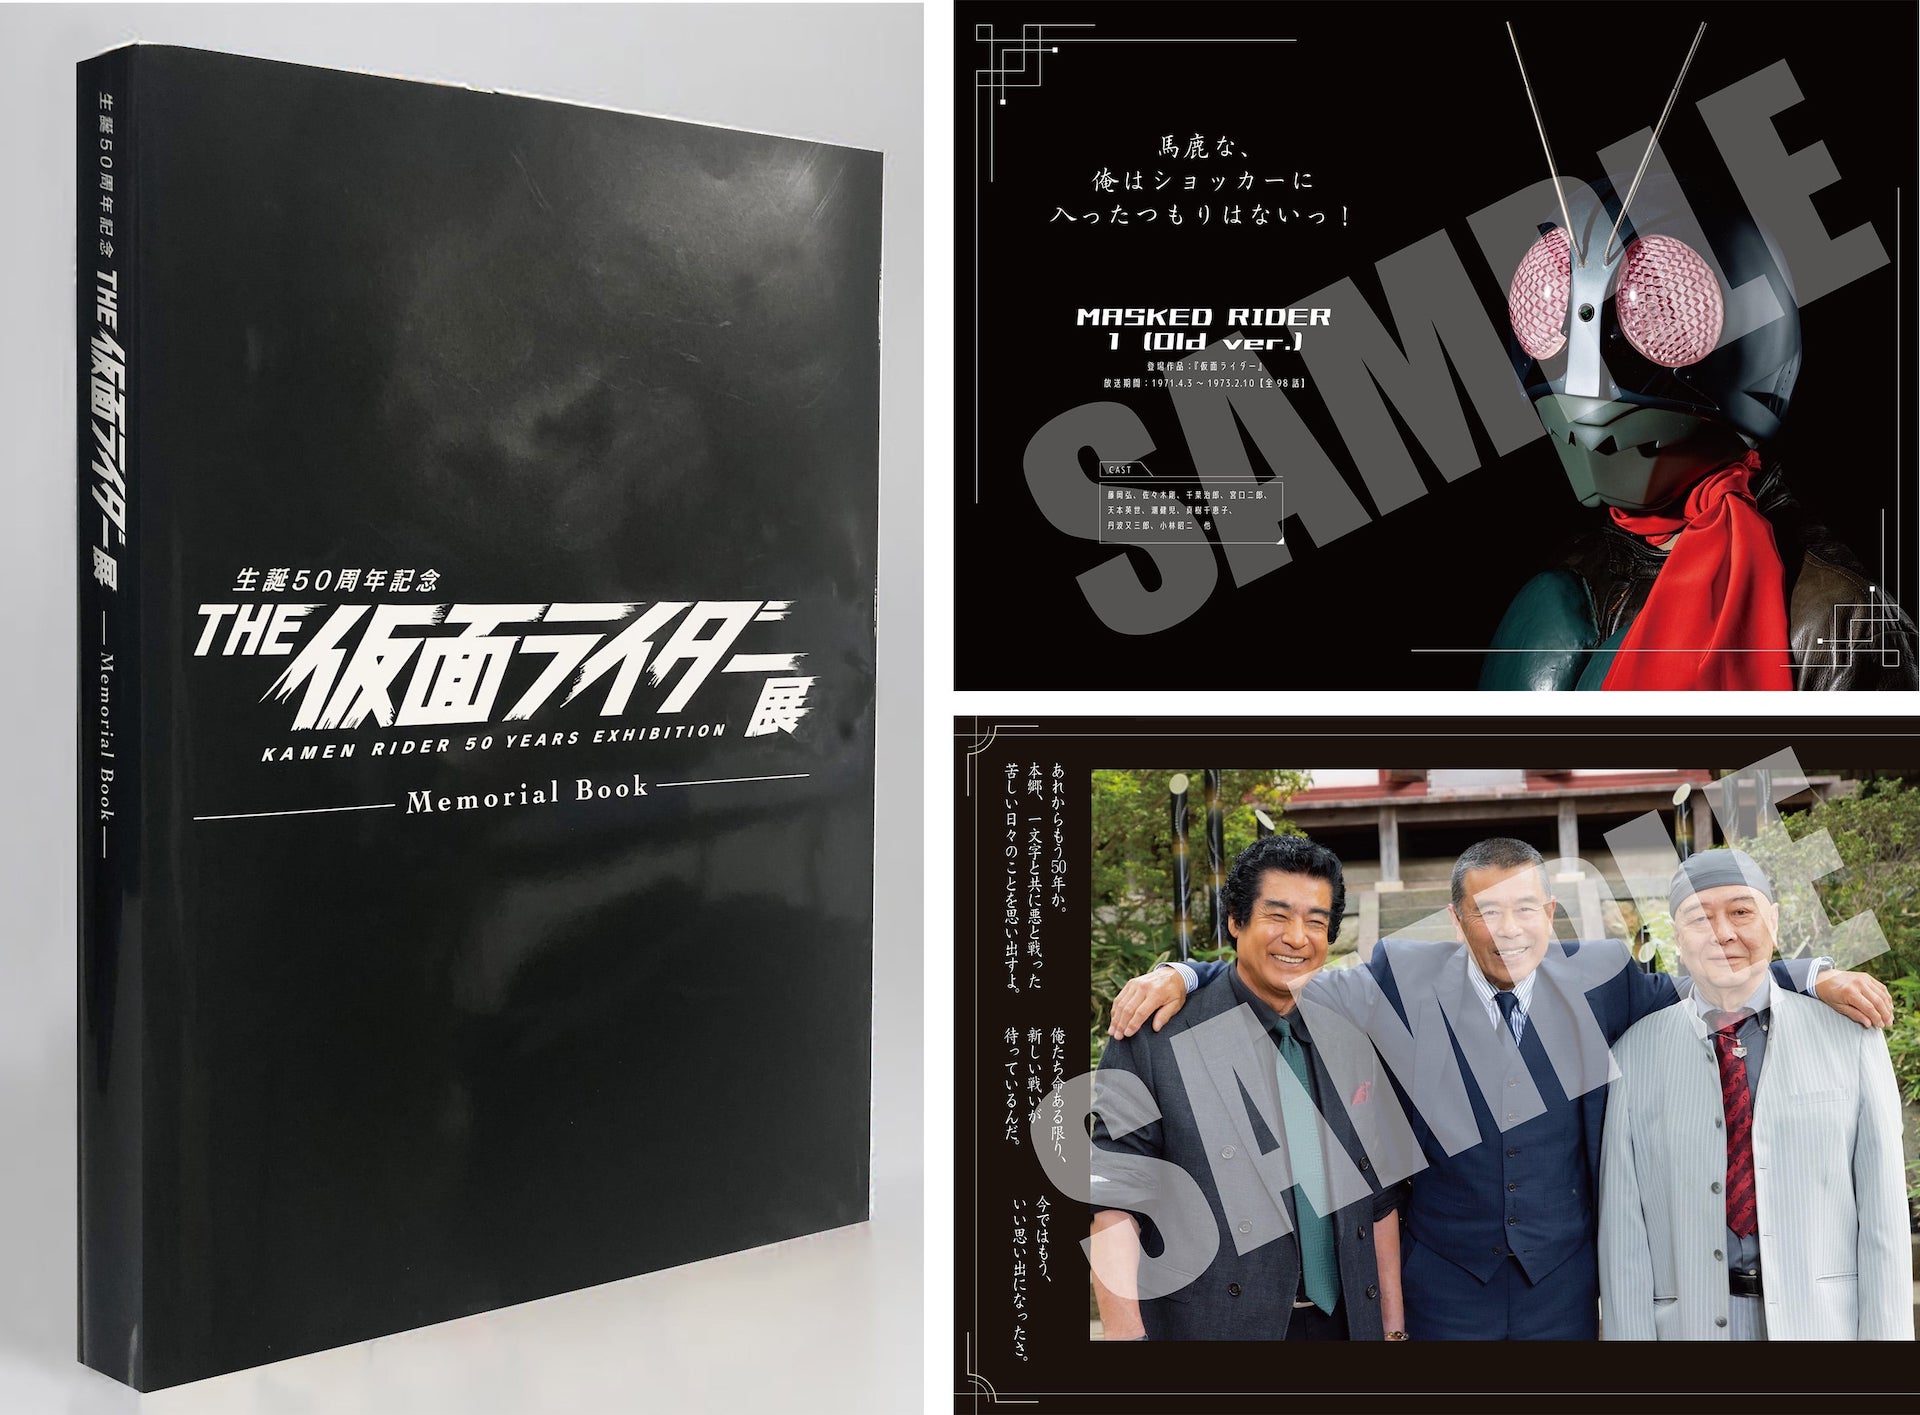 THE 仮面ライダー展 Memorial Book」7月15日発売決定！ - GAME Watch